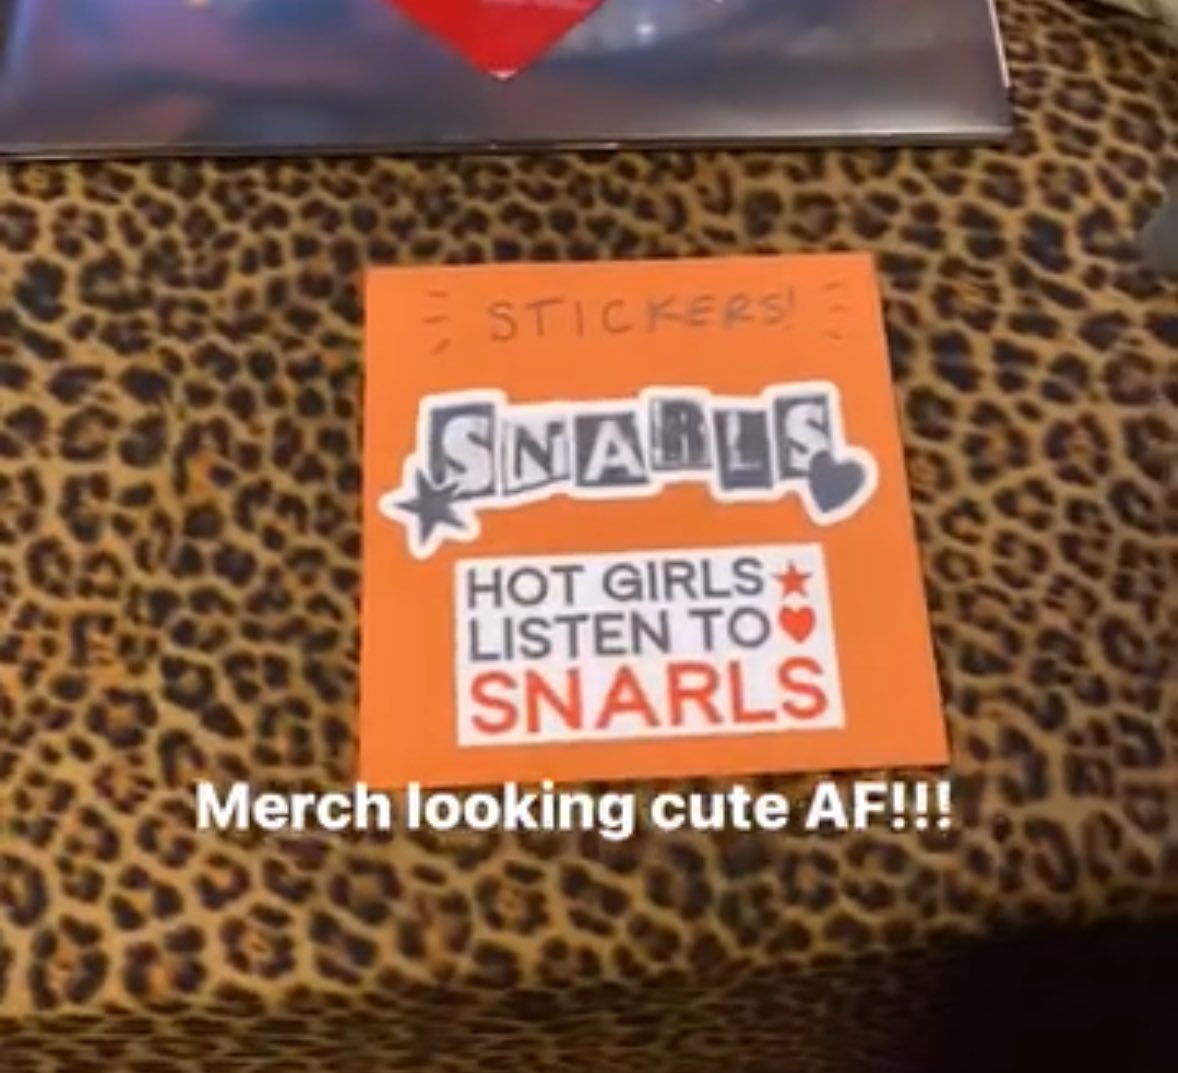 GUYS IM BEING SO SERIOUS RN if anyone is going to a @snarlsband concert (which you should be) will you buy me stickers and mail them to me?? i’m being so real. and of course ill pay you back! I can’t go due to my study abroad but I want these stickers sooo bad